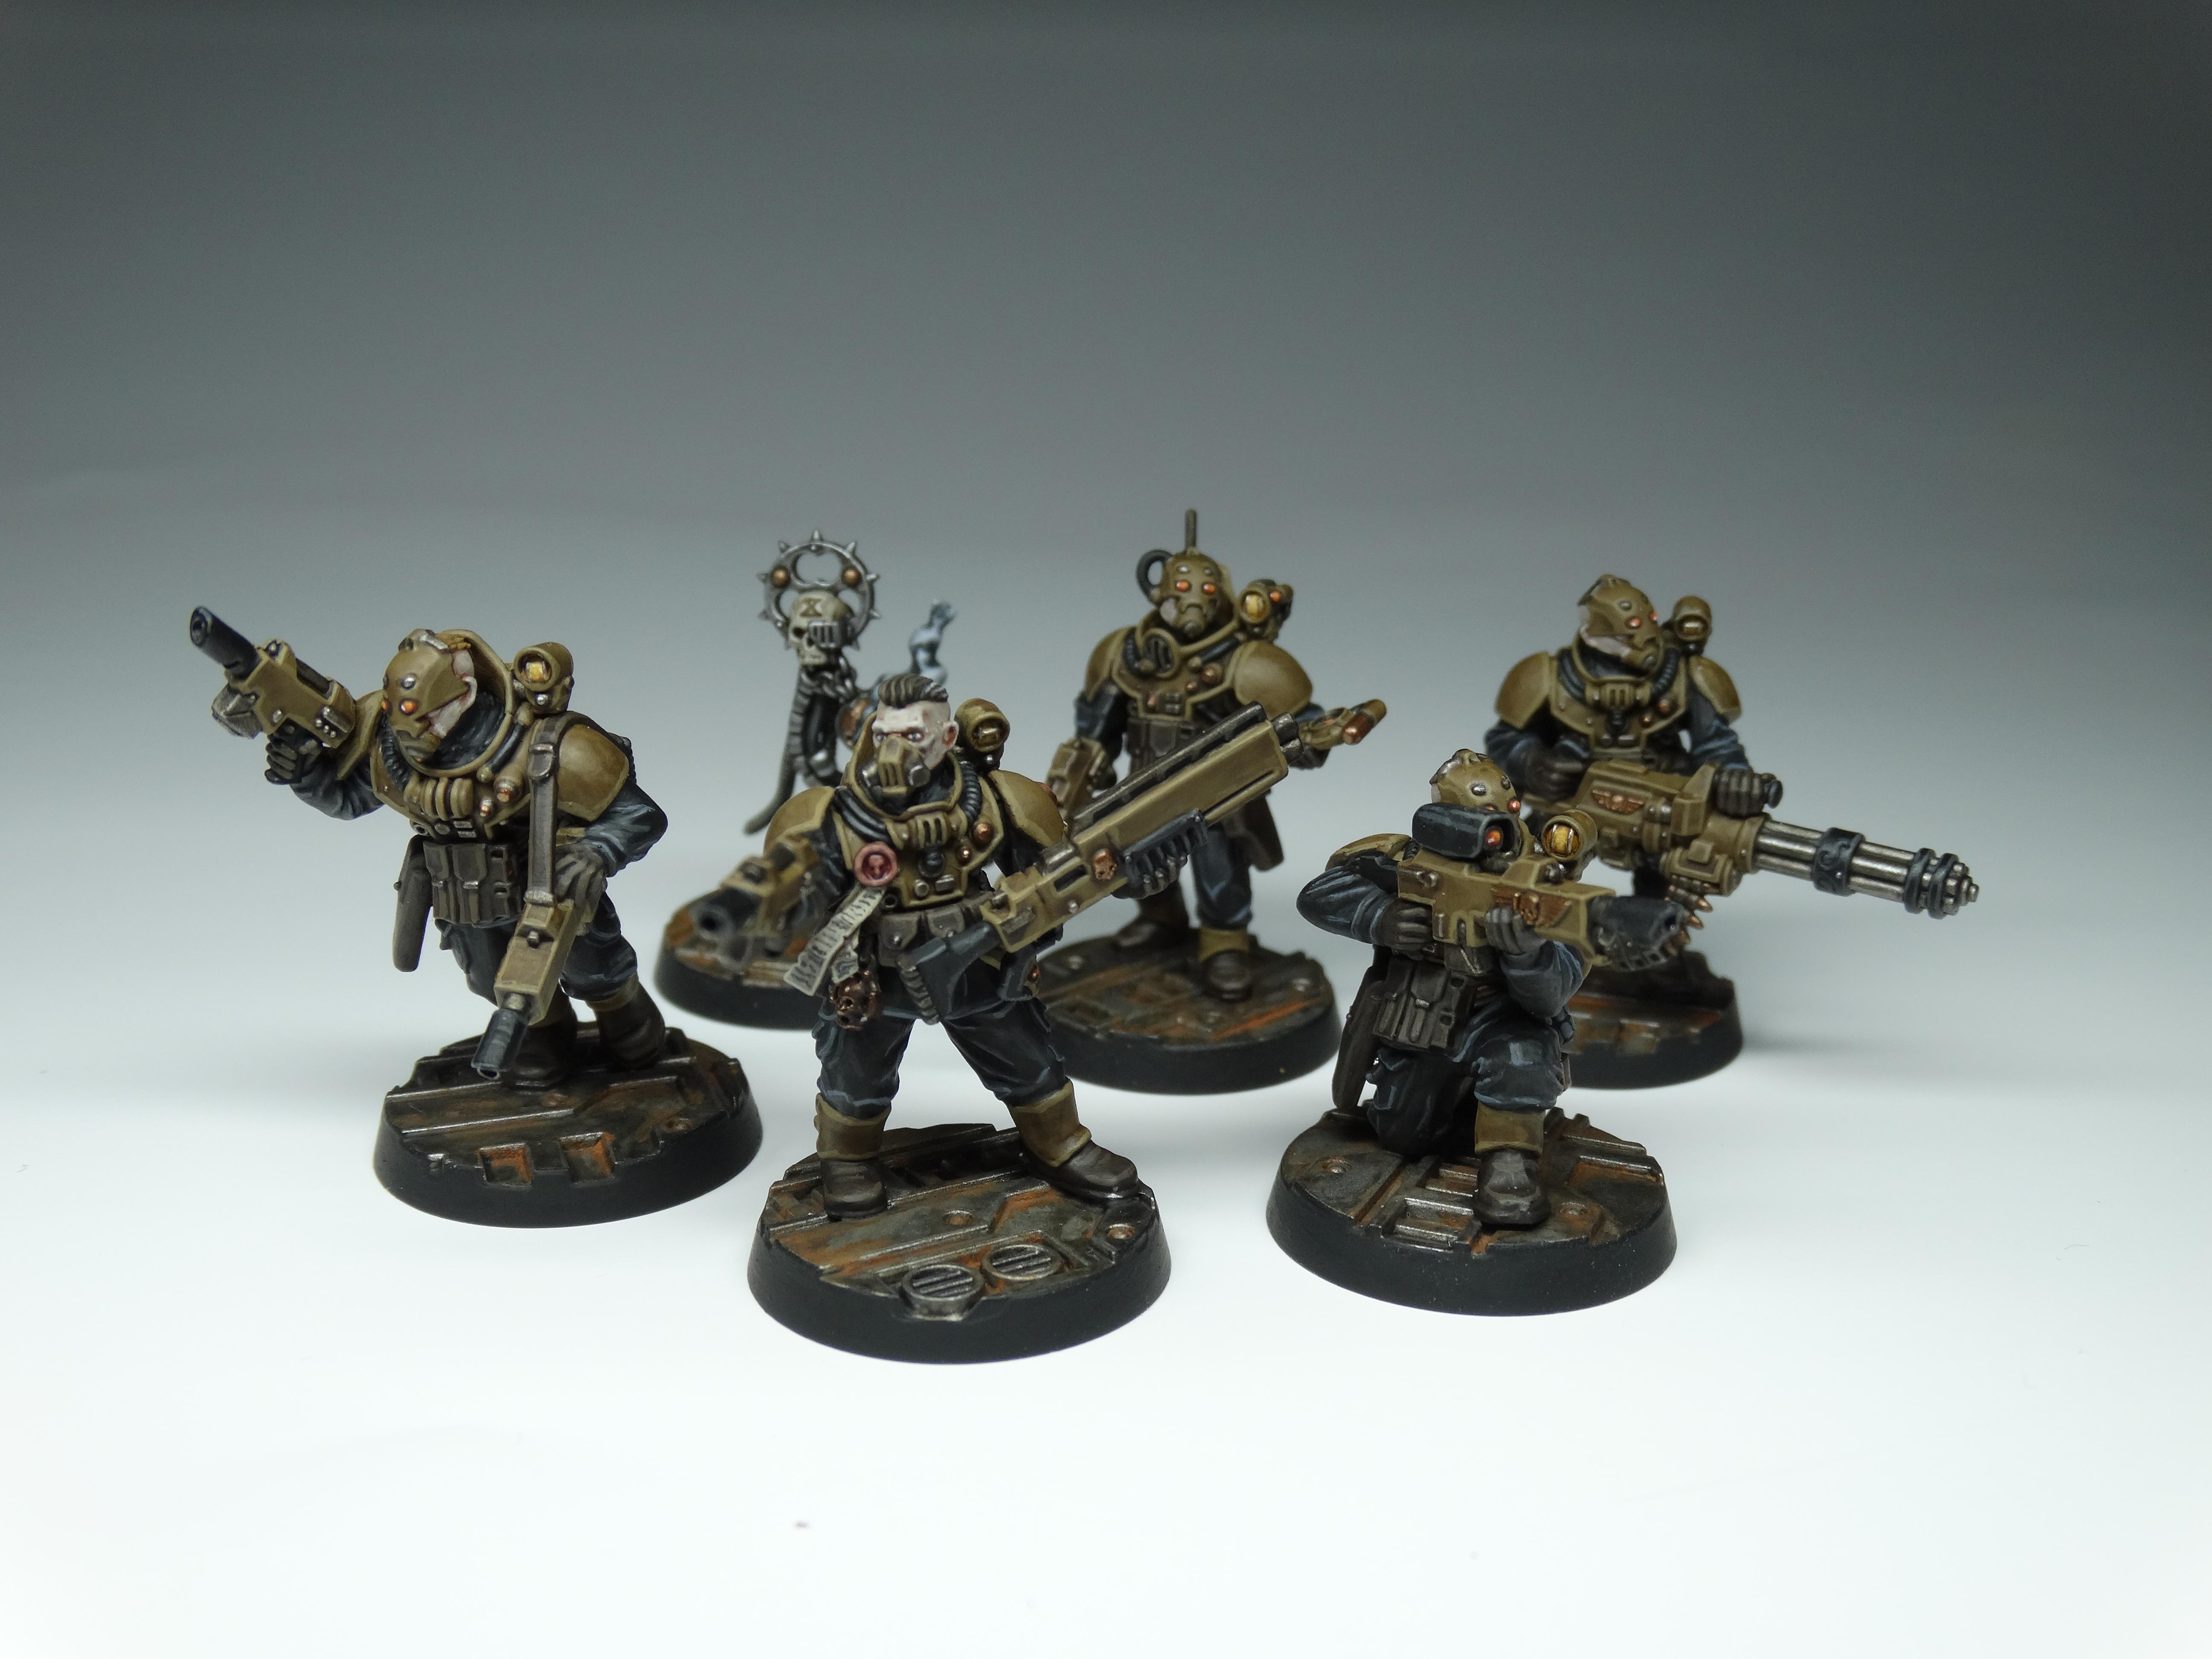 Conversion, Elucidian Starstriders, Imperial Guard, Imperial Navy, Inq28, Kitbash, Rogue Trader, Voidsmen, Warhammer 40,000